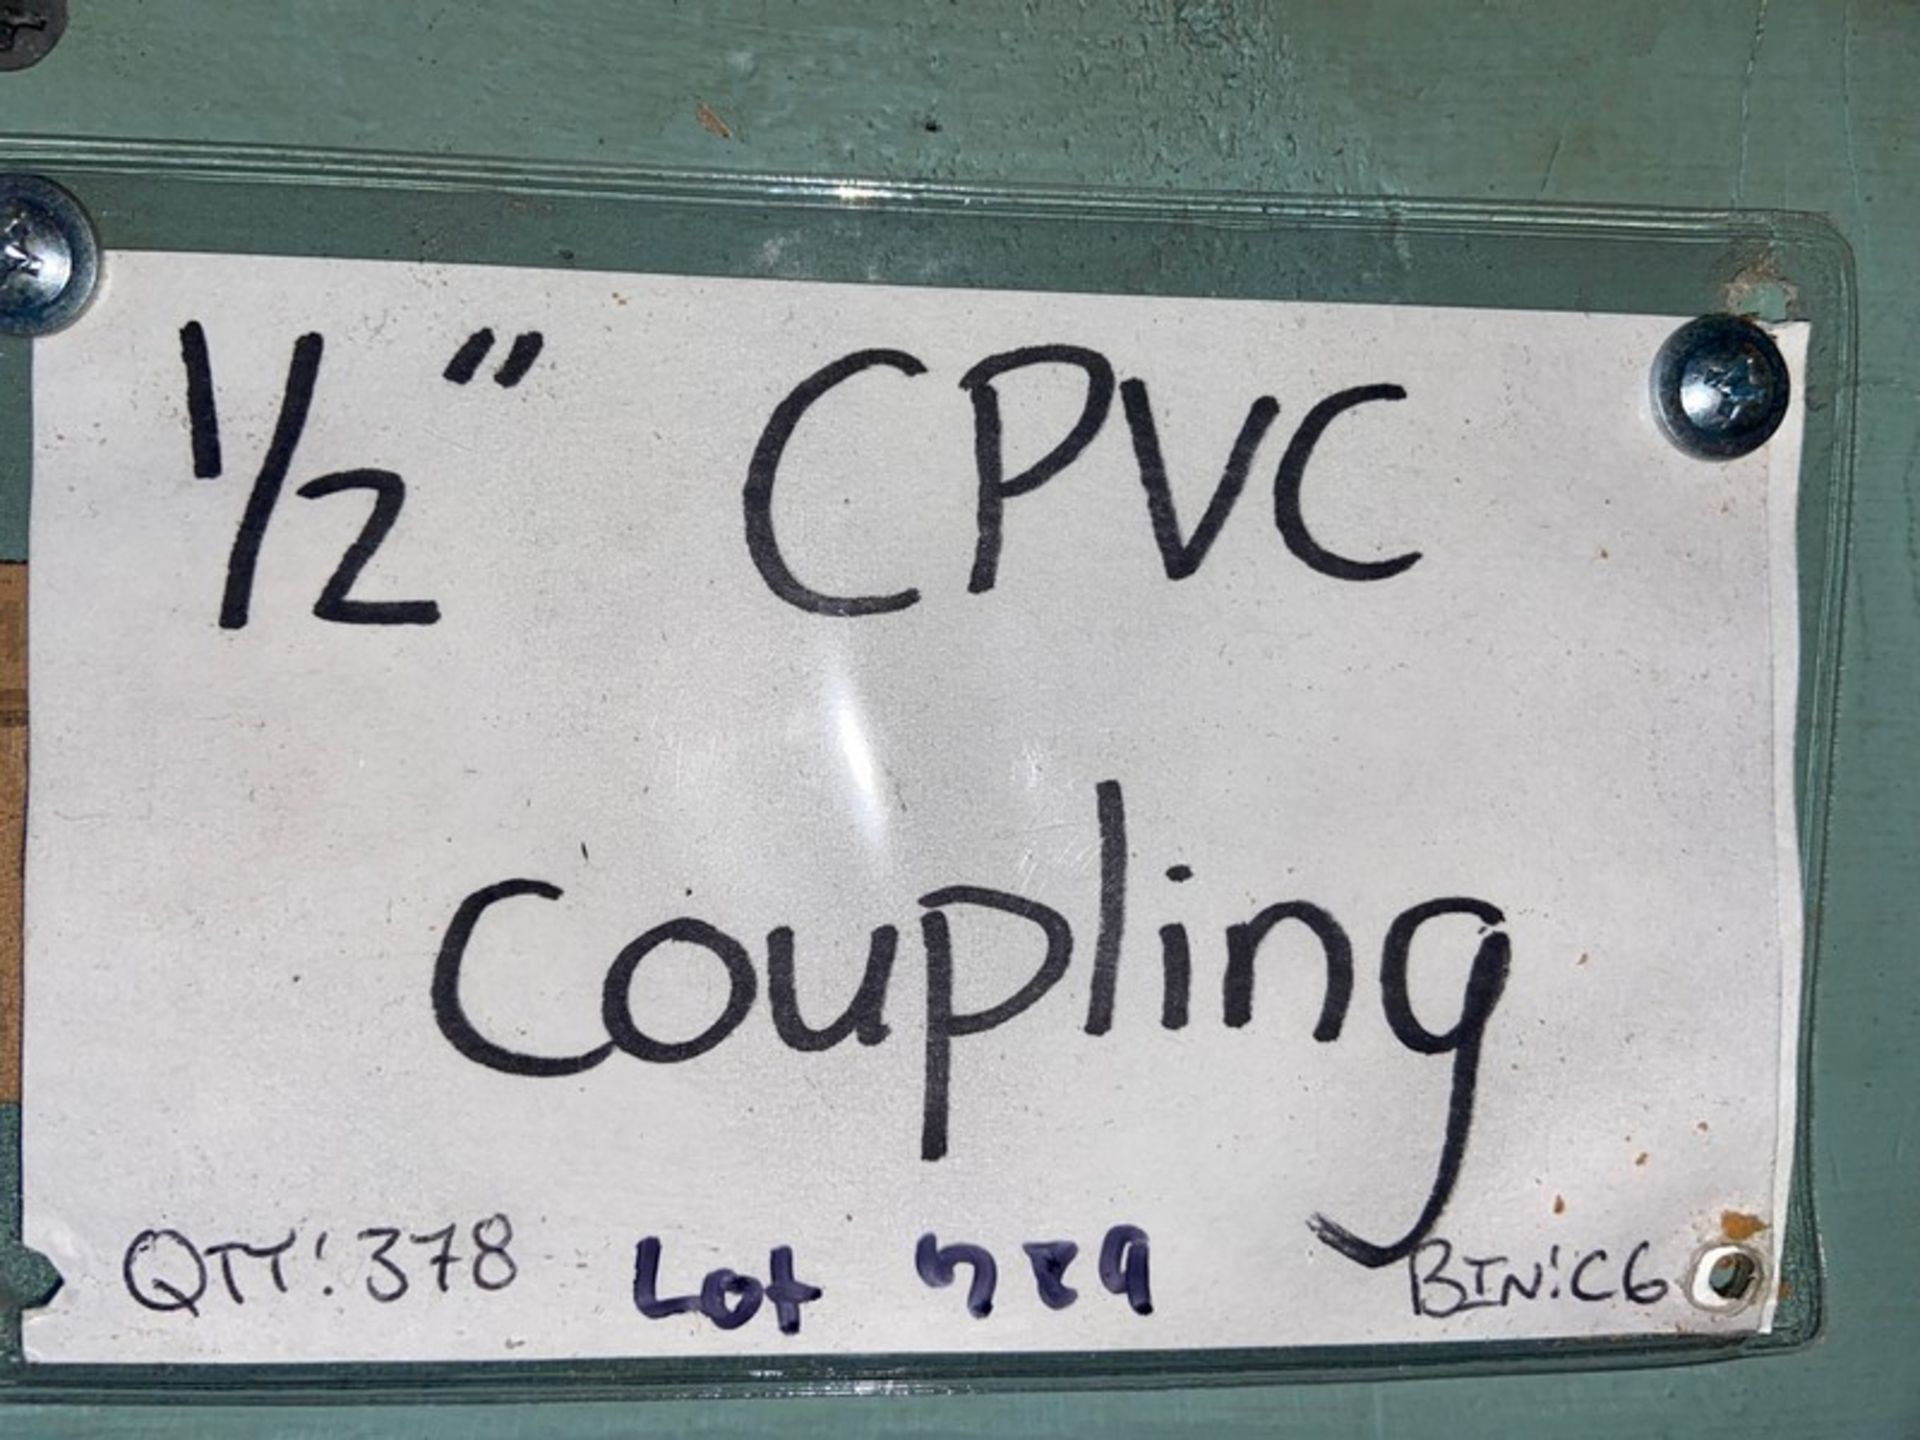 (378) 1/2” CPVC Coupling (Bin:C6) (LOCATED IN MONROEVILLE, PA) - Image 2 of 2